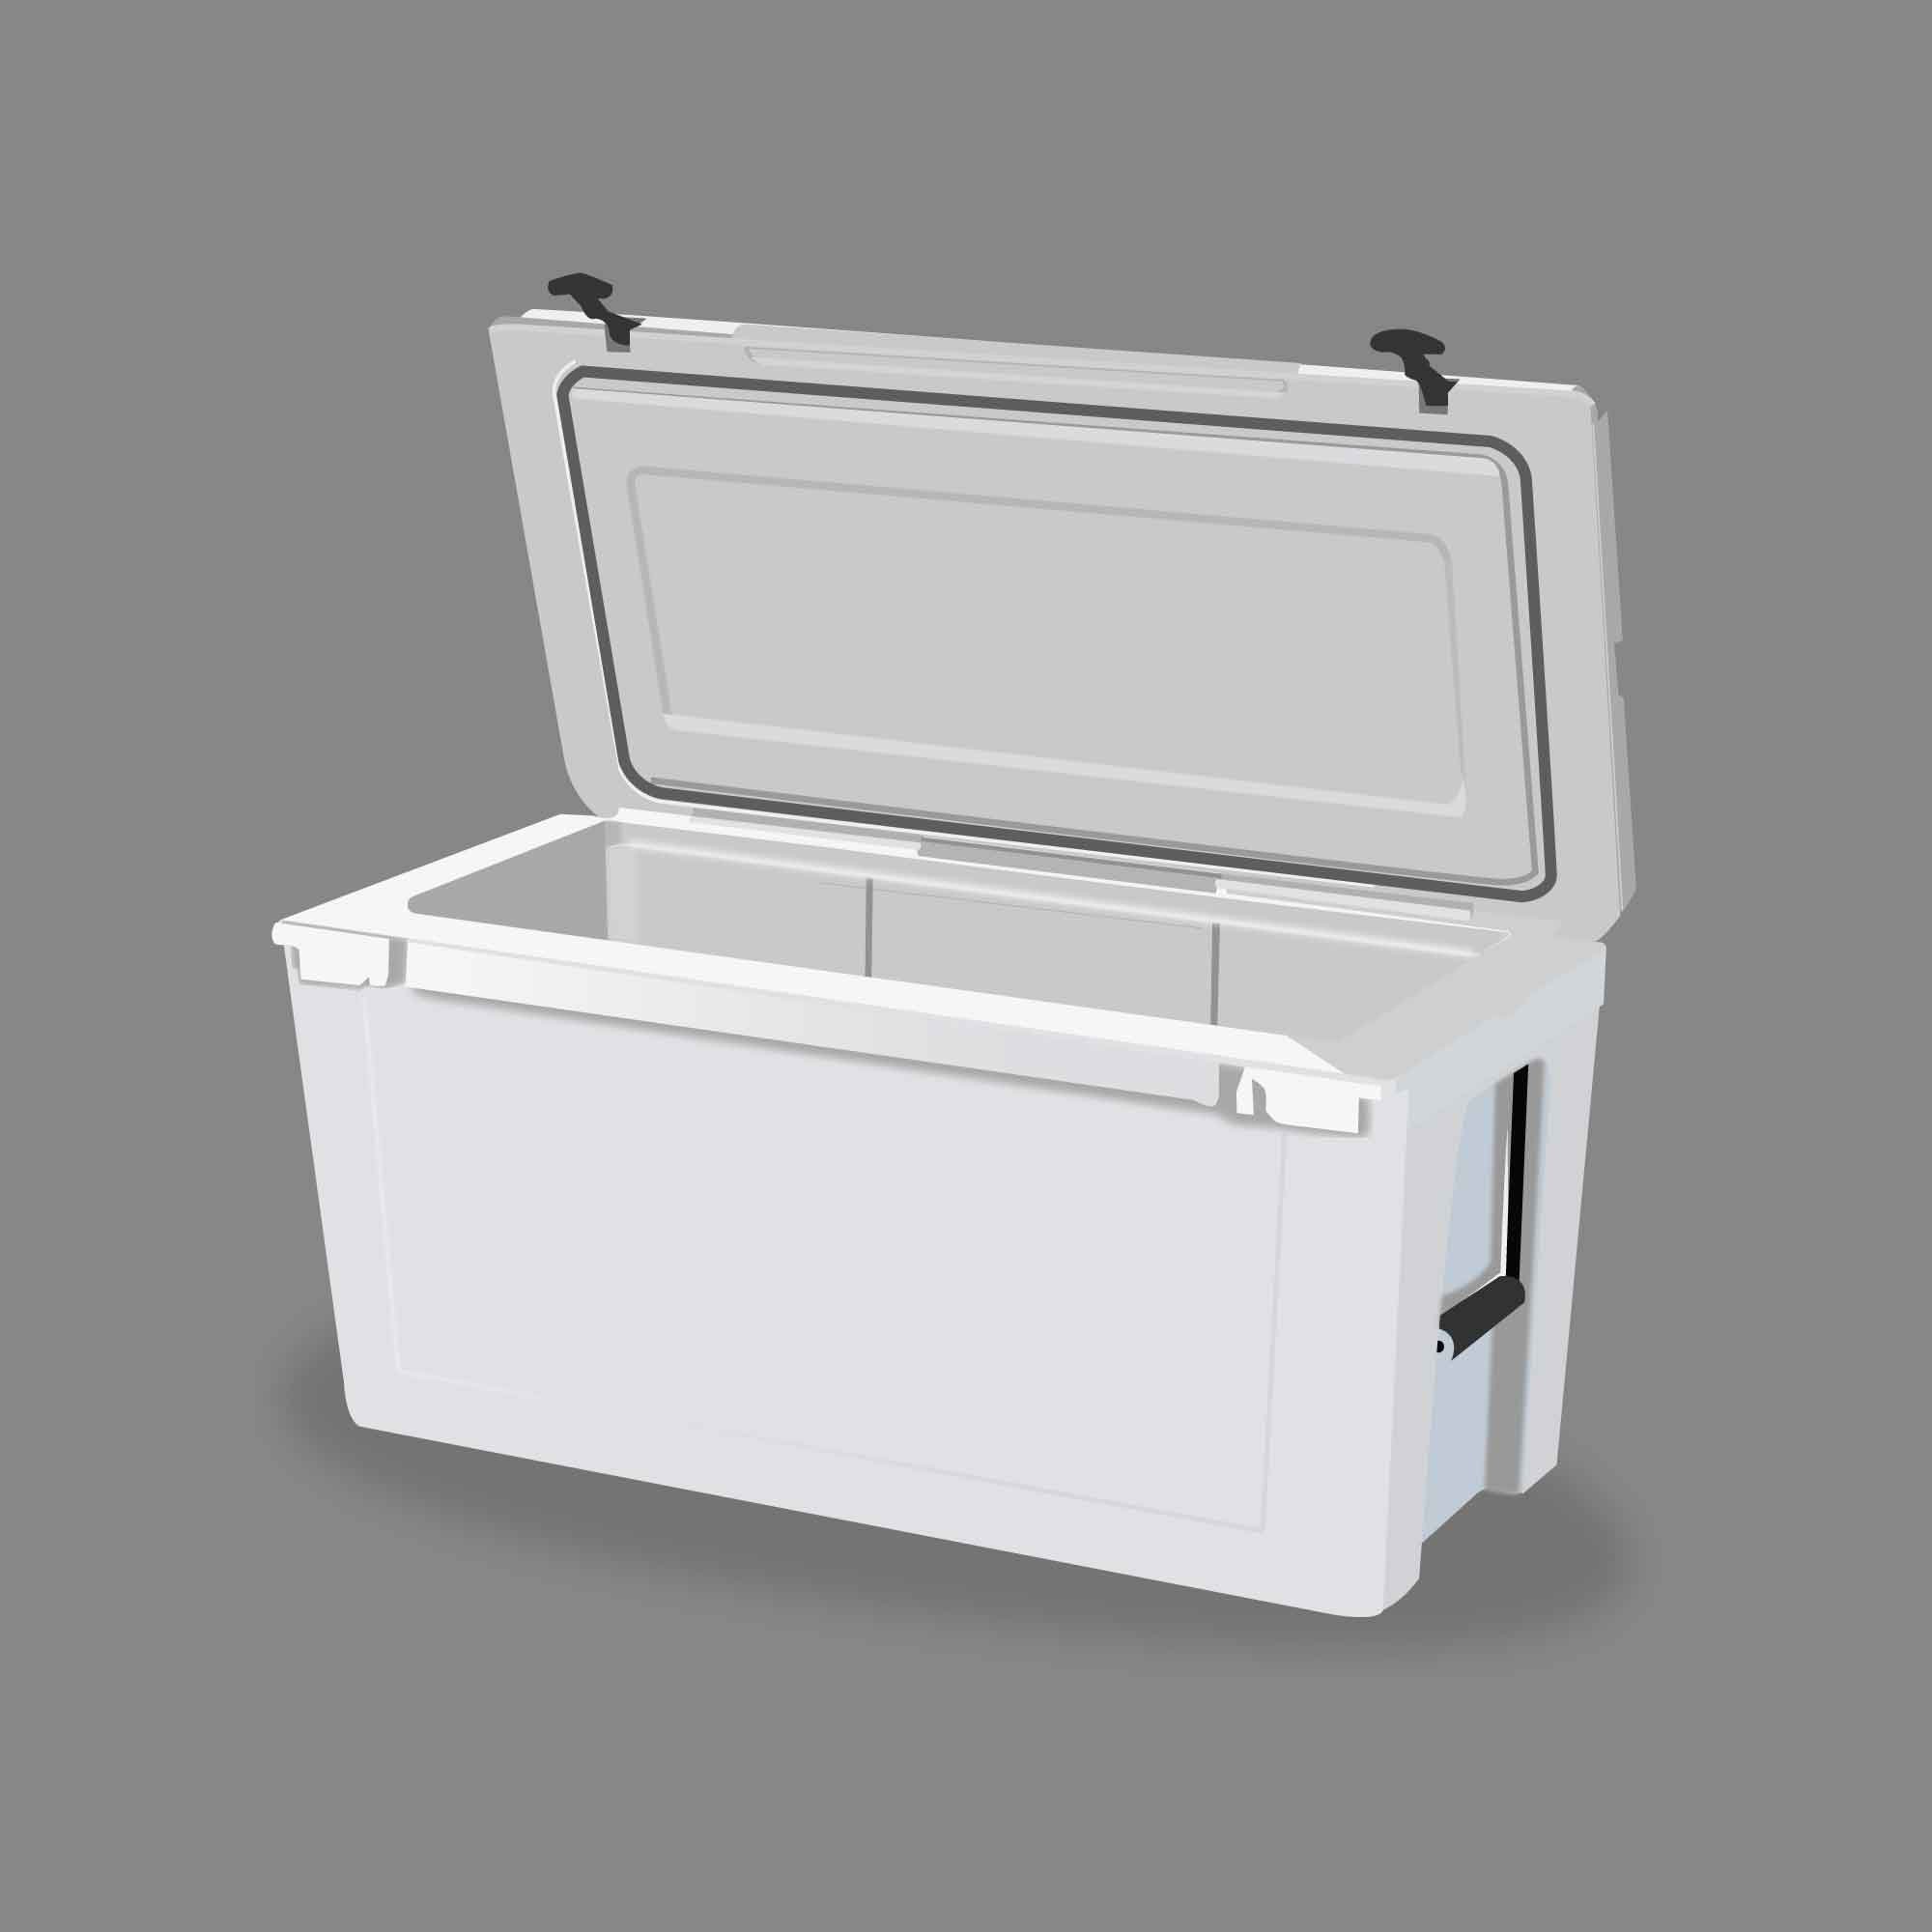 Chocolate Shipping Cooler. Styrofoam Cooler AND Ice Pack for